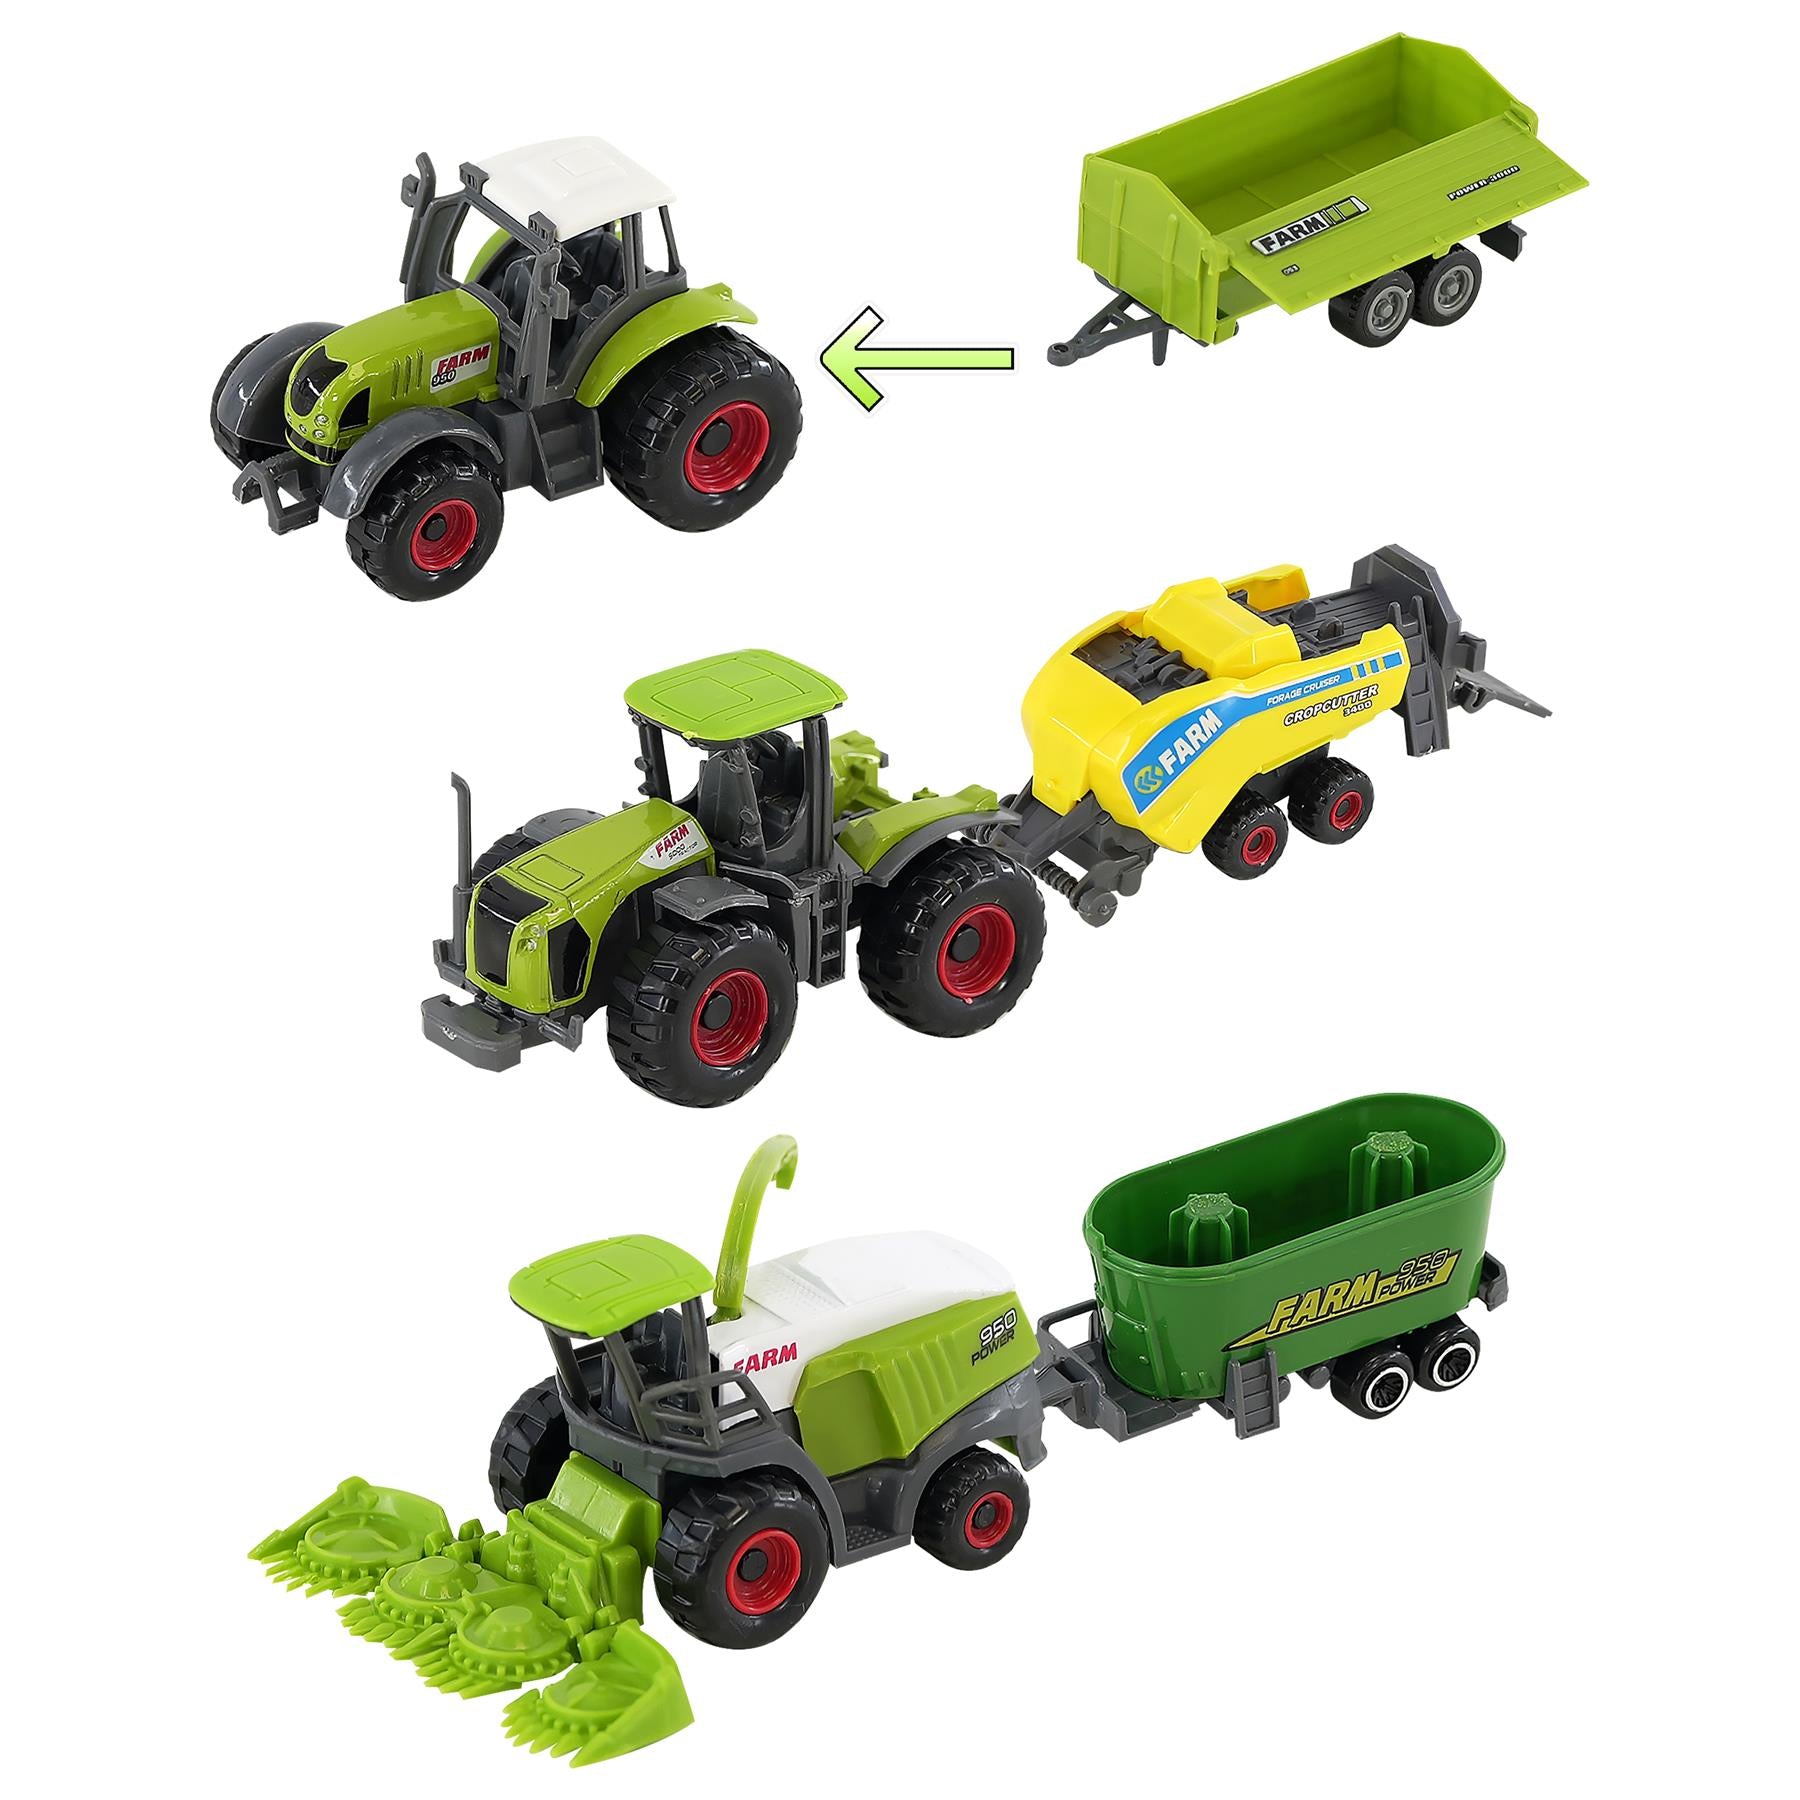 Diecast Tractor Set Collect Vehicles Play Set 22 Piece